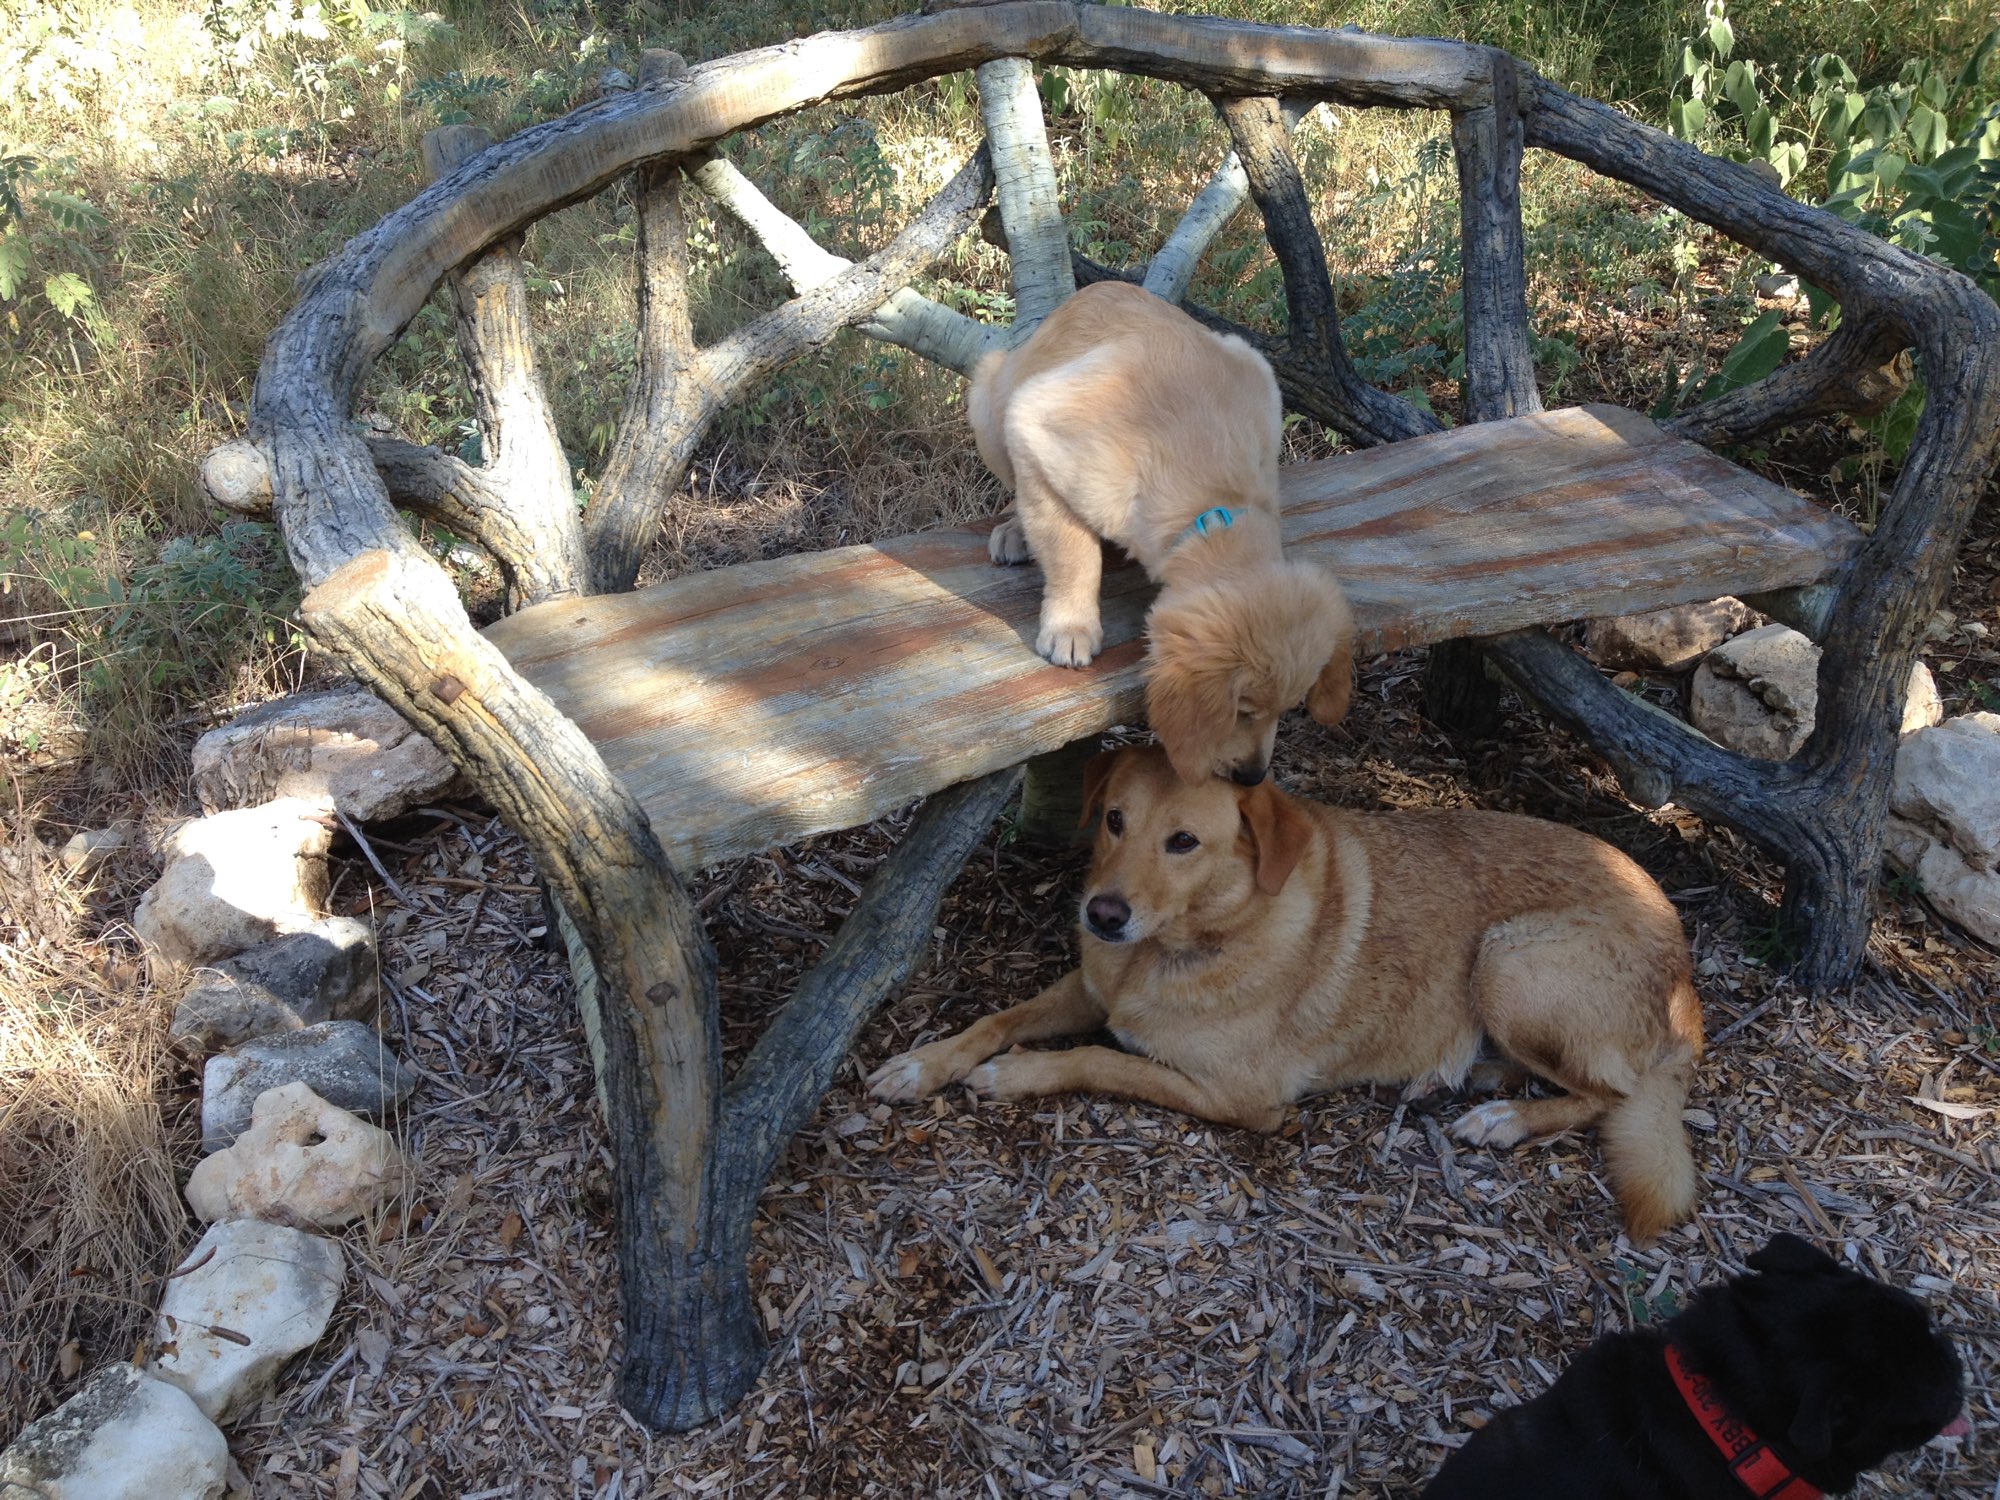 Dogs on a Faux Bois Bench